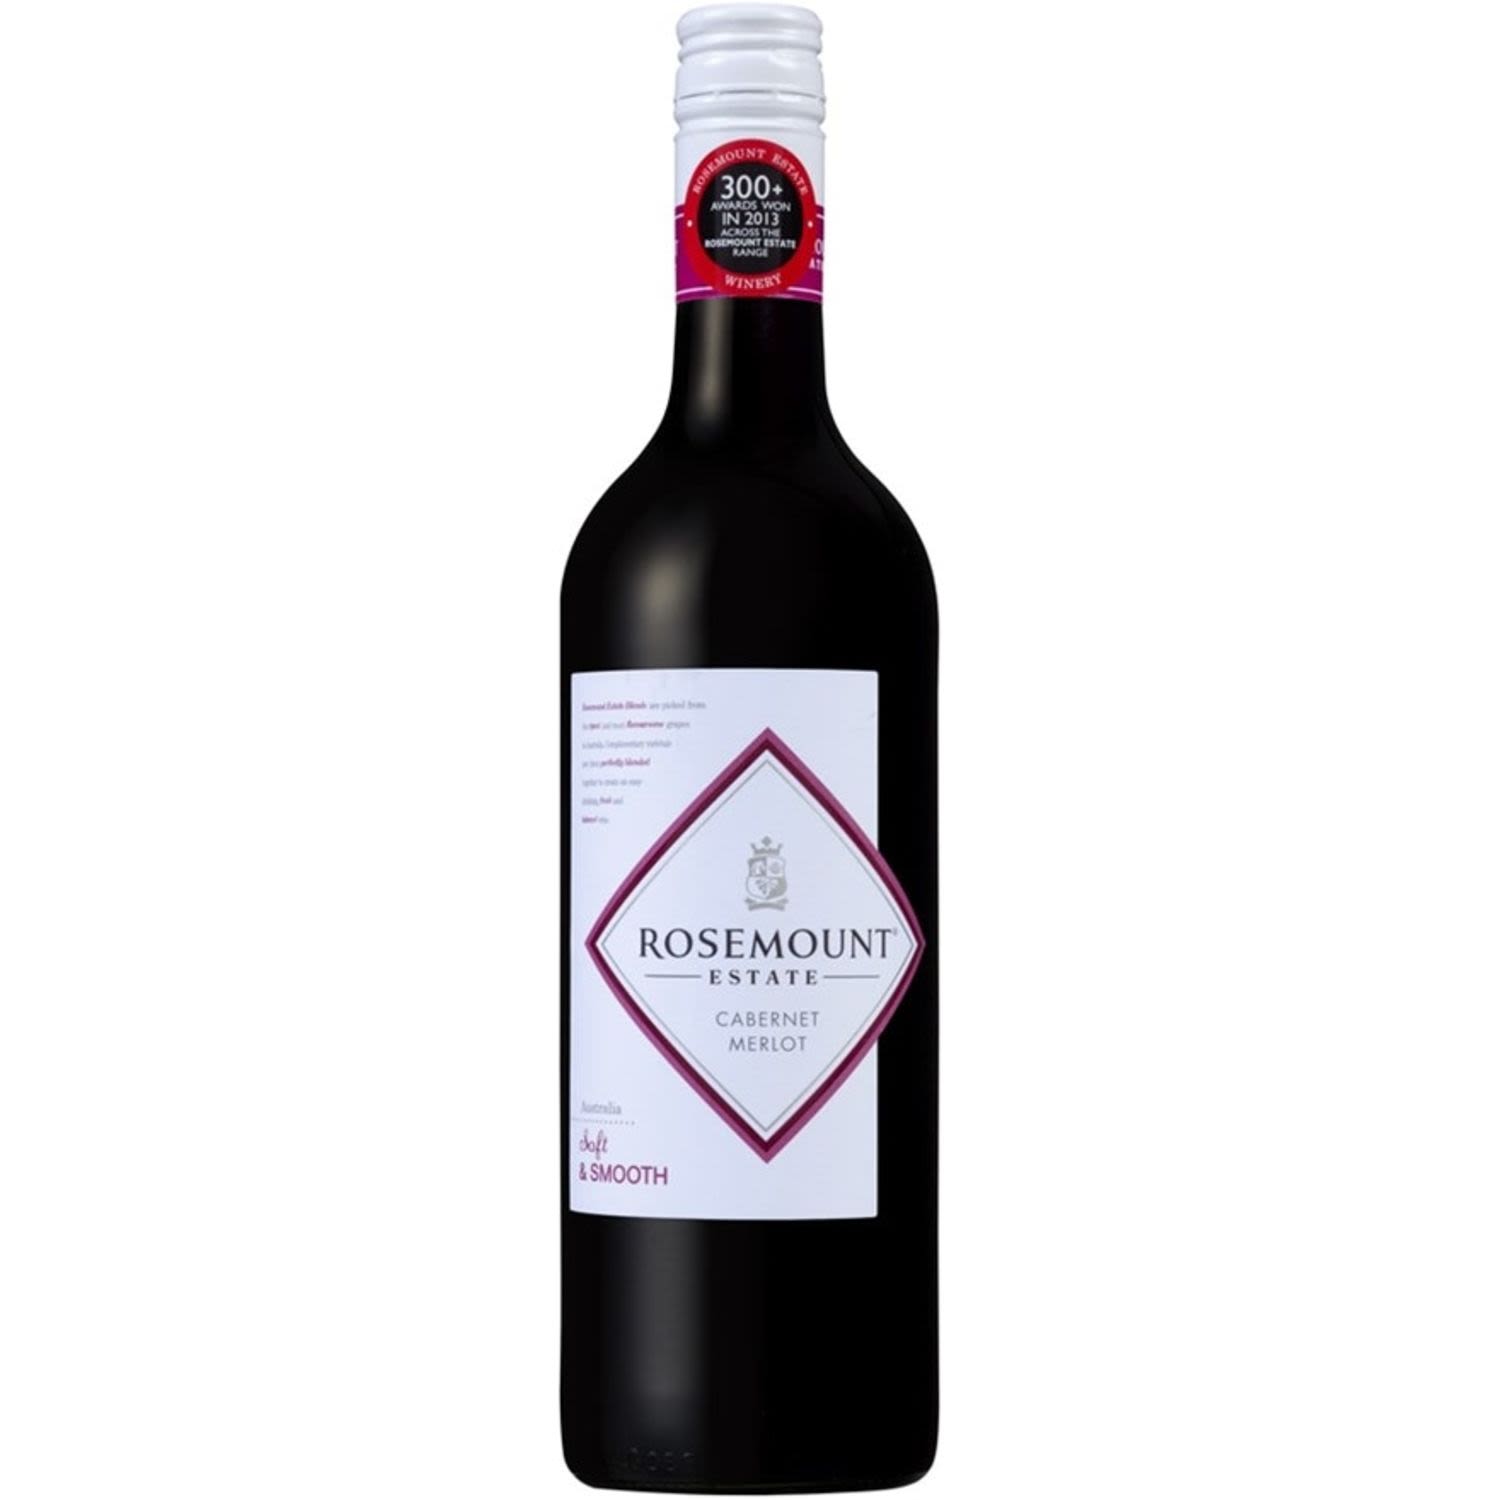 The palate is medium bodied with flavours of red berry fruit, cocoa powder, raspberries & earthy notes. Finishes soft round & supple.<br /> <br />Alcohol Volume: 13.50%<br /><br />Pack Format: Bottle<br /><br />Standard Drinks: 8</br /><br />Pack Type: Bottle<br /><br />Country of Origin: Australia<br /><br />Region: South Eastern Australia<br /><br />Vintage: '2015<br />